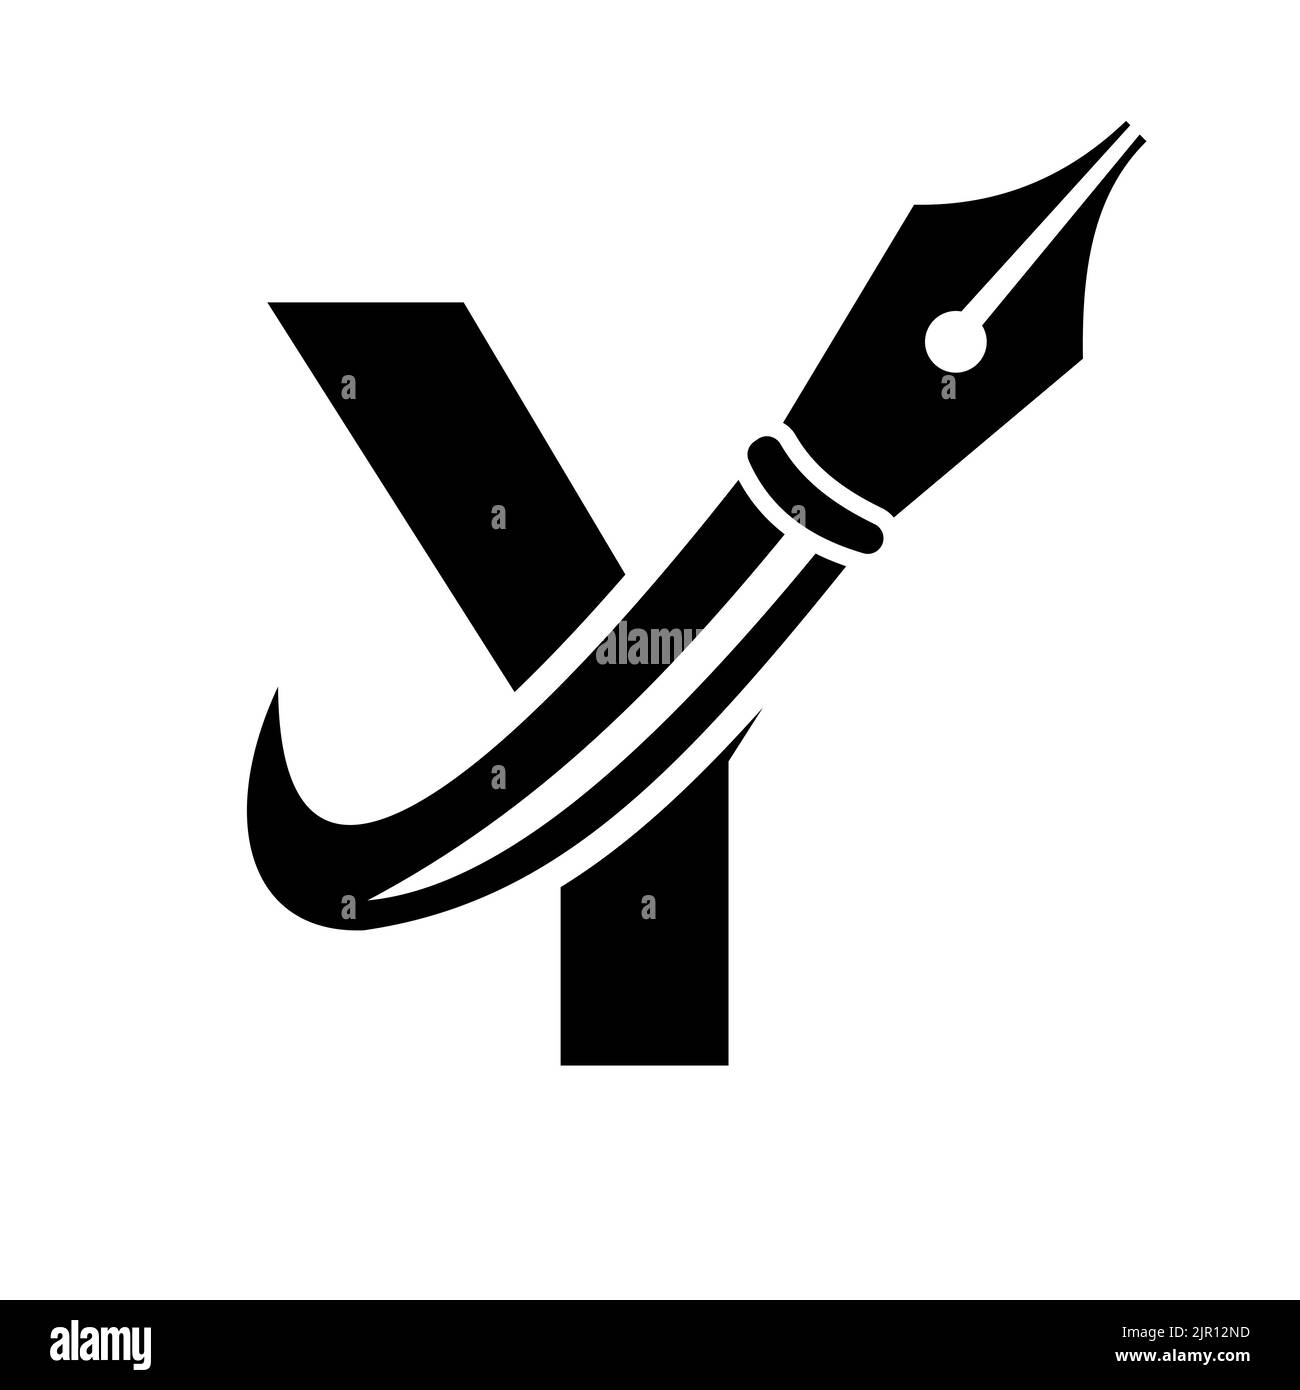 Education Logo on Letter Y Concept with Pen Nib Vector Template Stock Vector